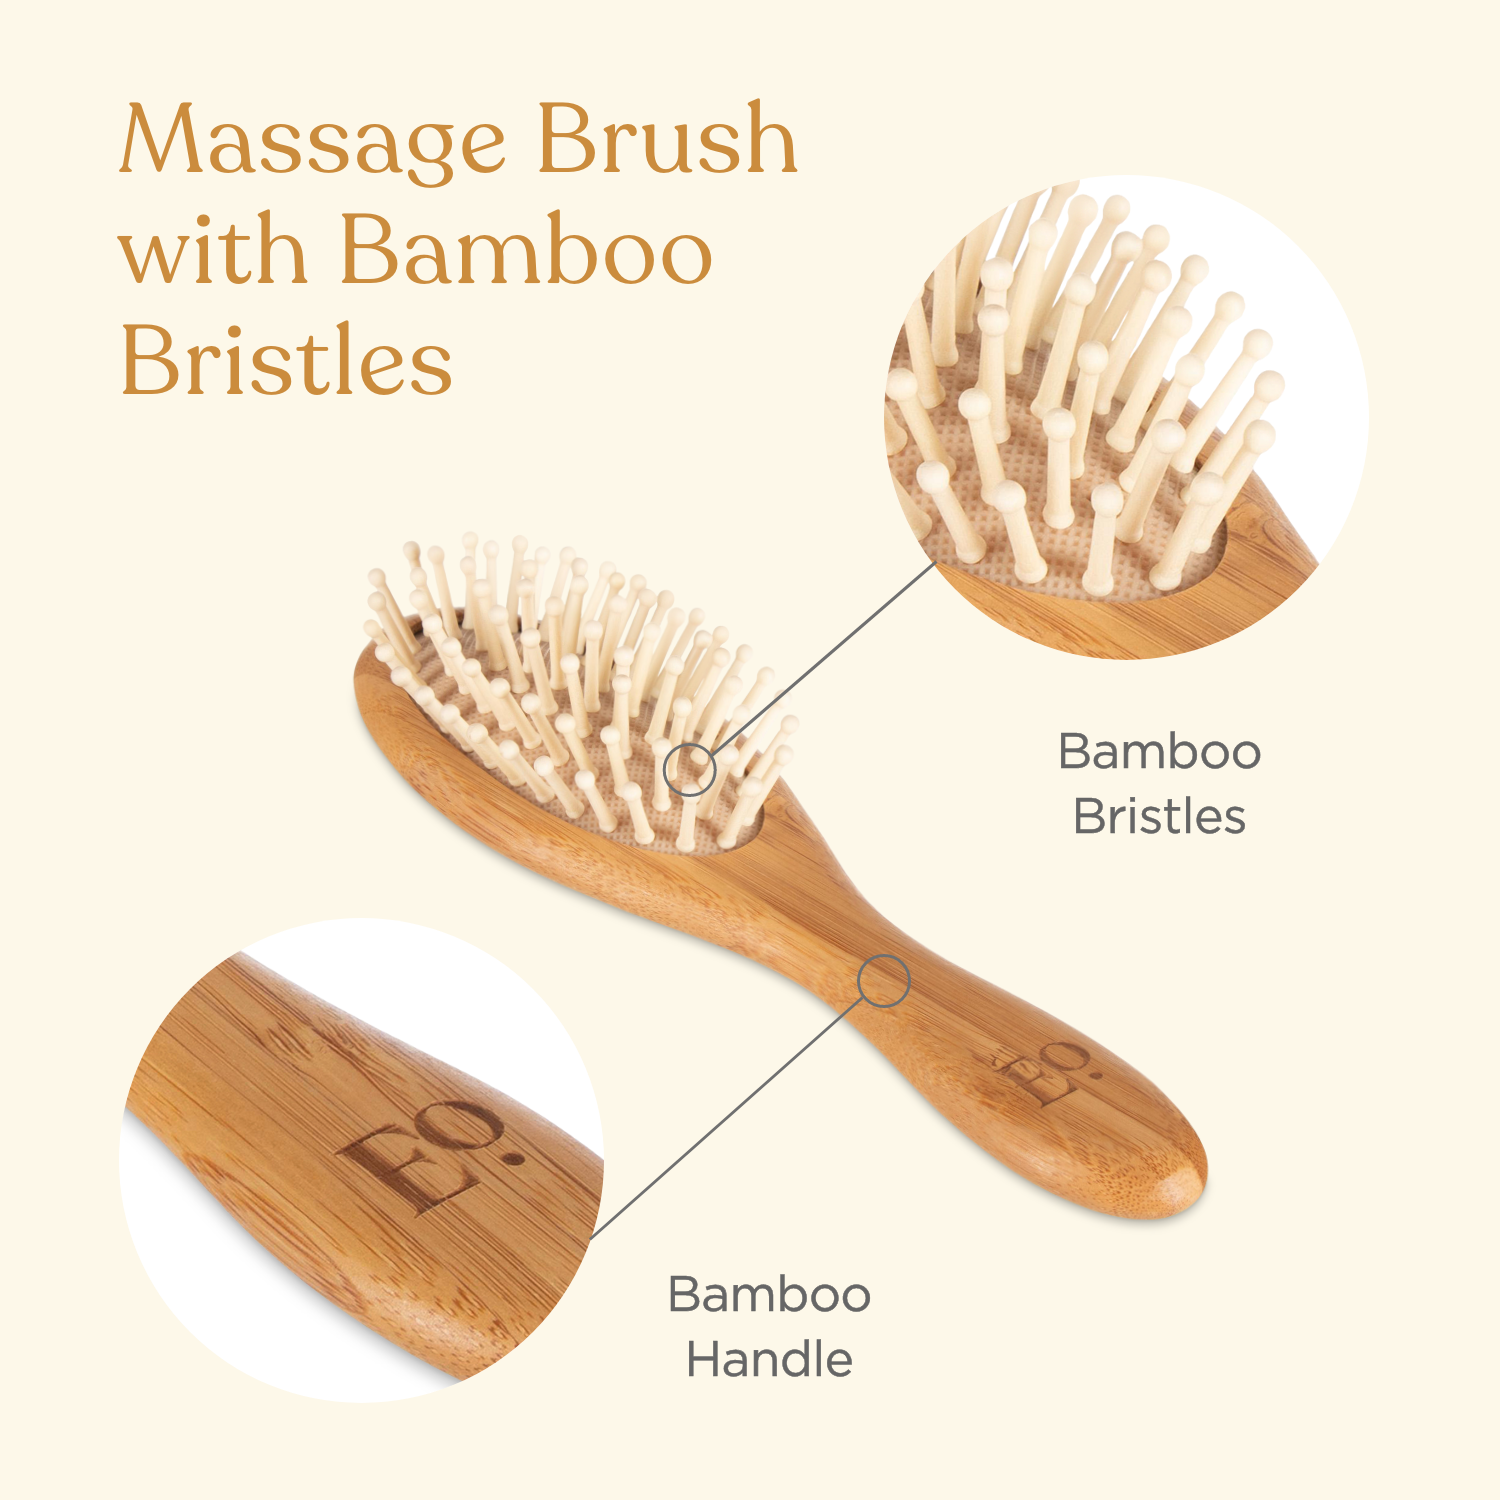 Benefits of Bamboo Pregnancy Products